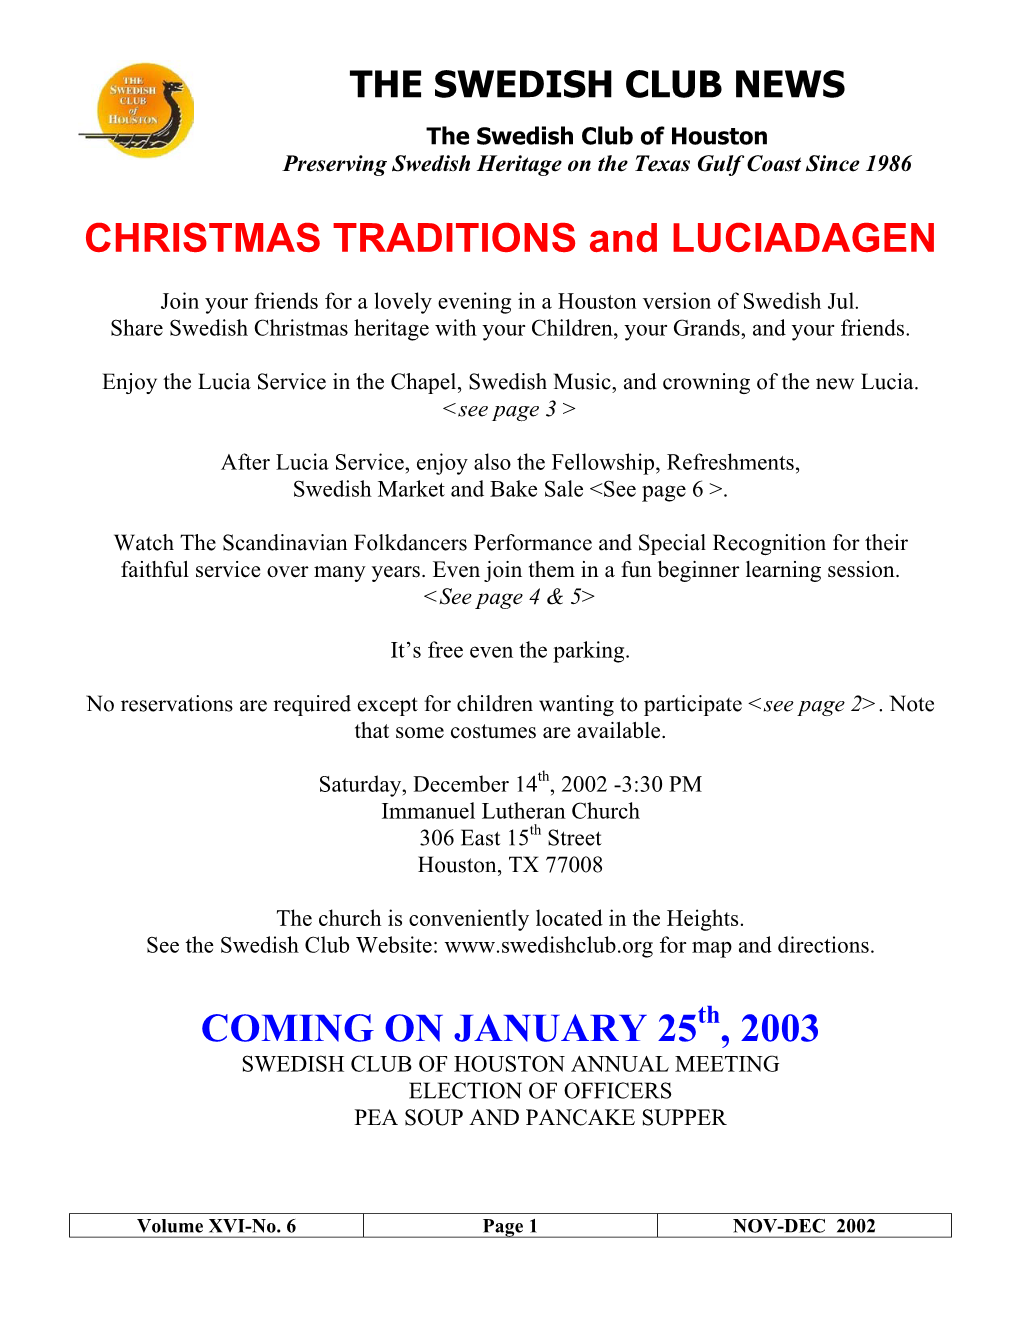 CHRISTMAS TRADITIONS and LUCIADAGEN COMING ON